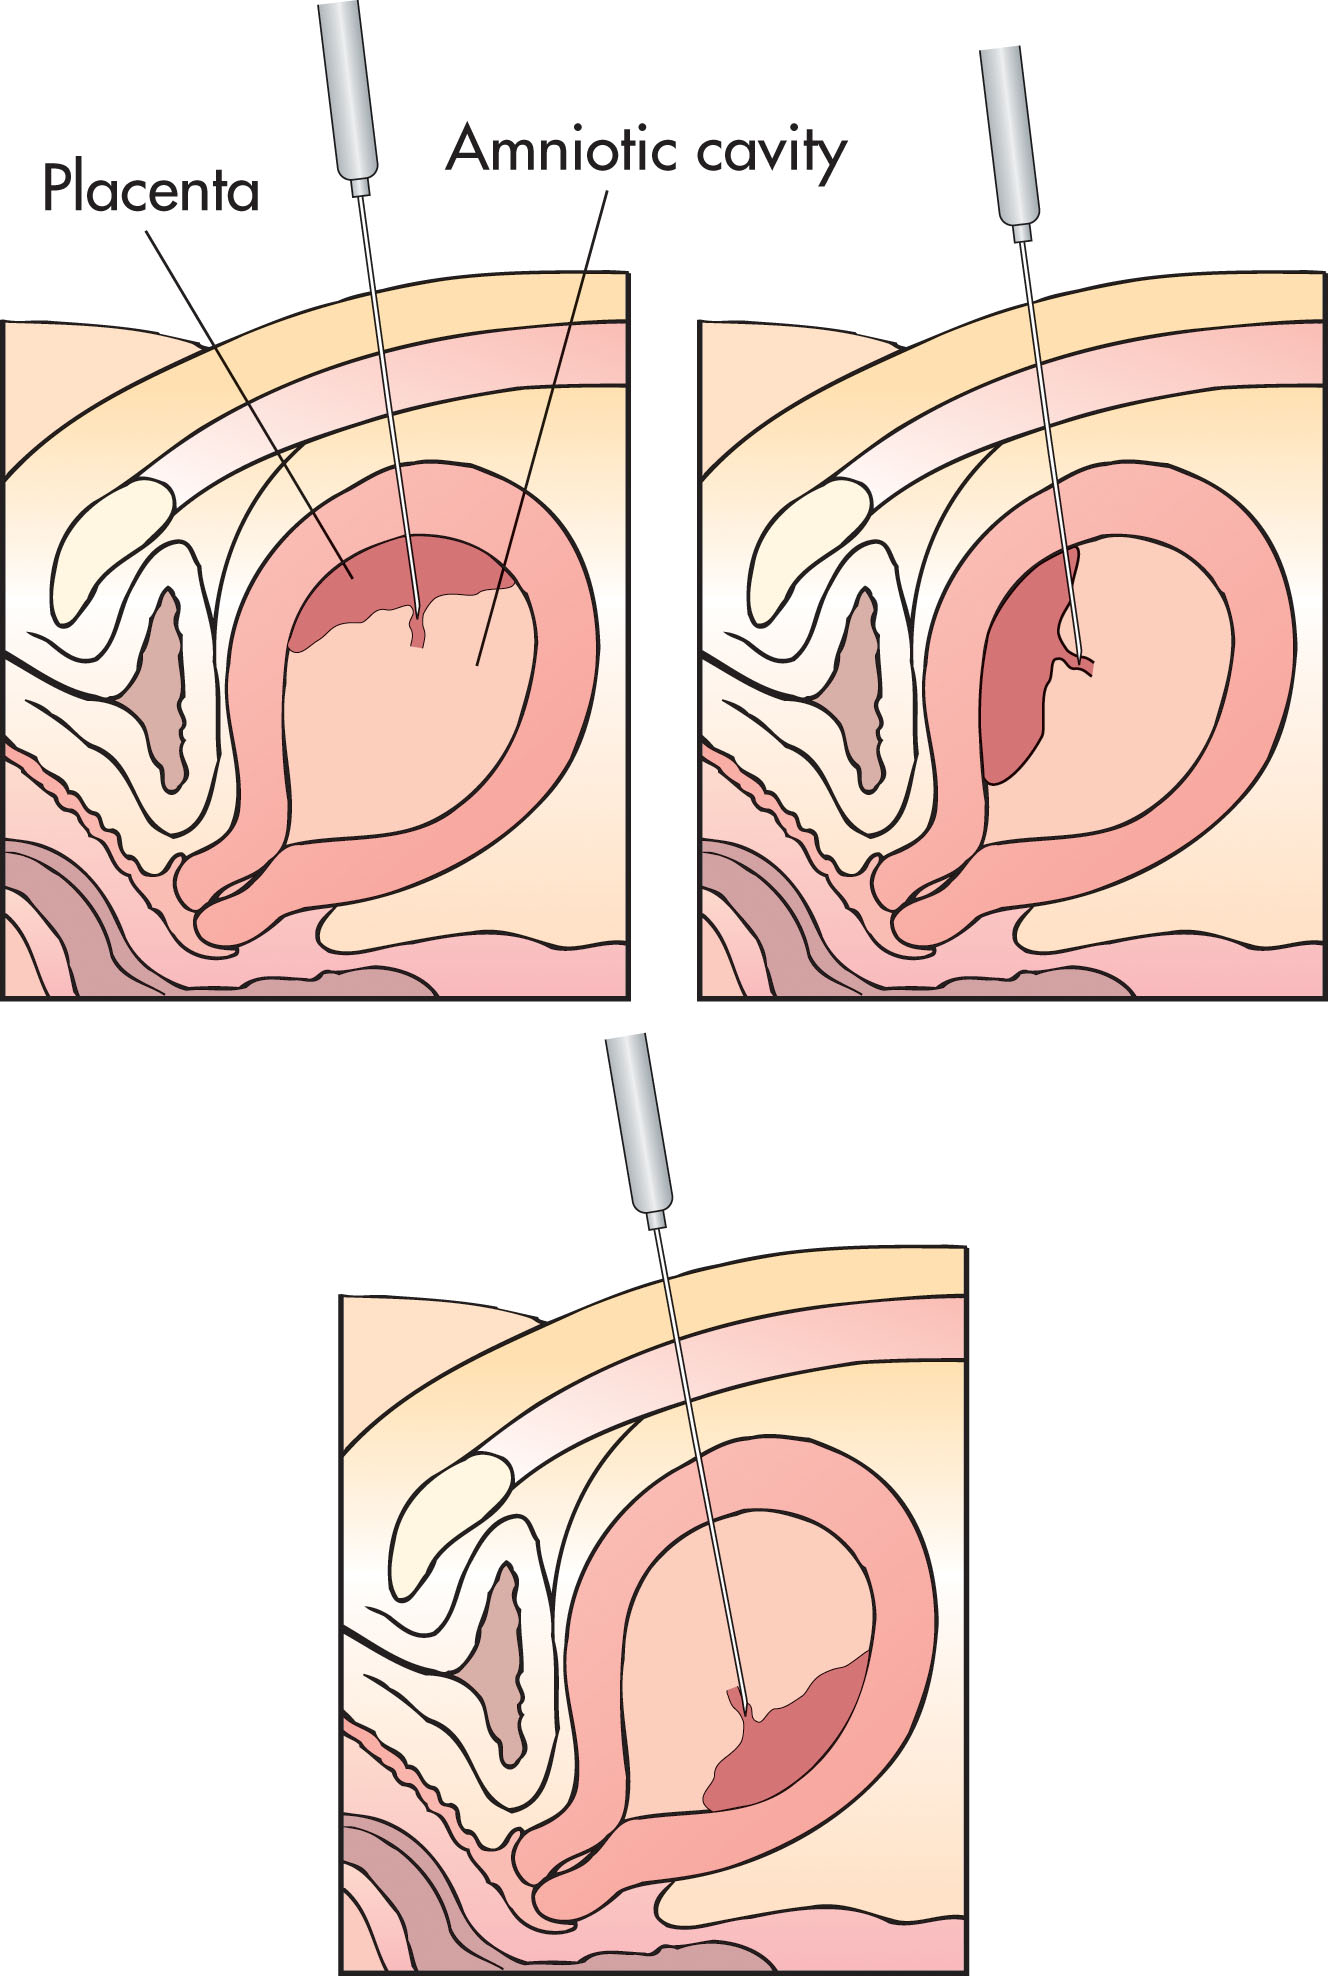 Fig. 54.11, Possible needle paths in cordocentesis depending on the placental position.